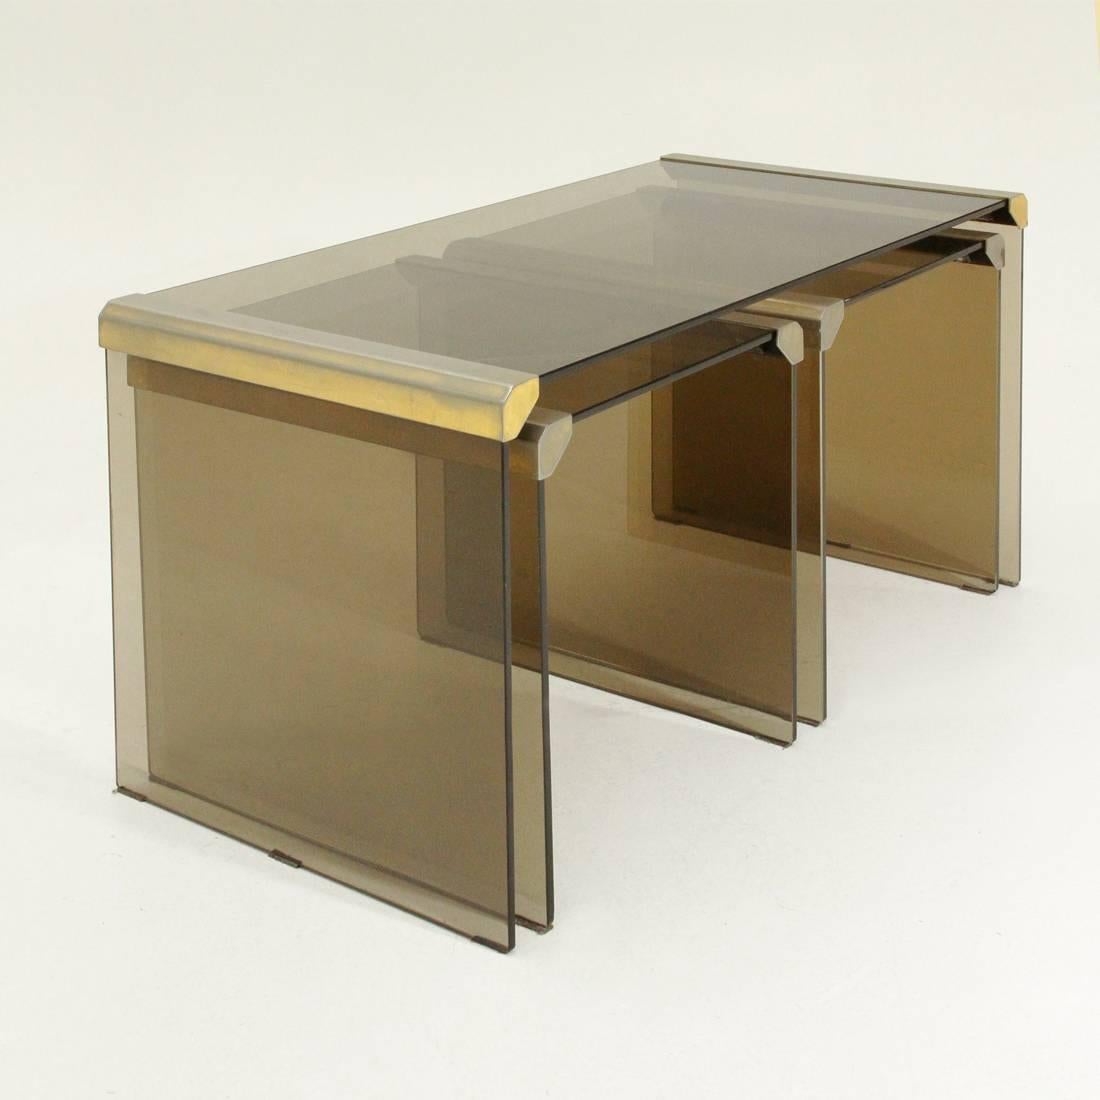 Set of three 1970s production tables designed by Pierangelo Gallotti.
Coffee tables made of smoked glass plates with brass joints.
The two small tables can be stored under the big one.
Structure in good condition, some marks on the brass